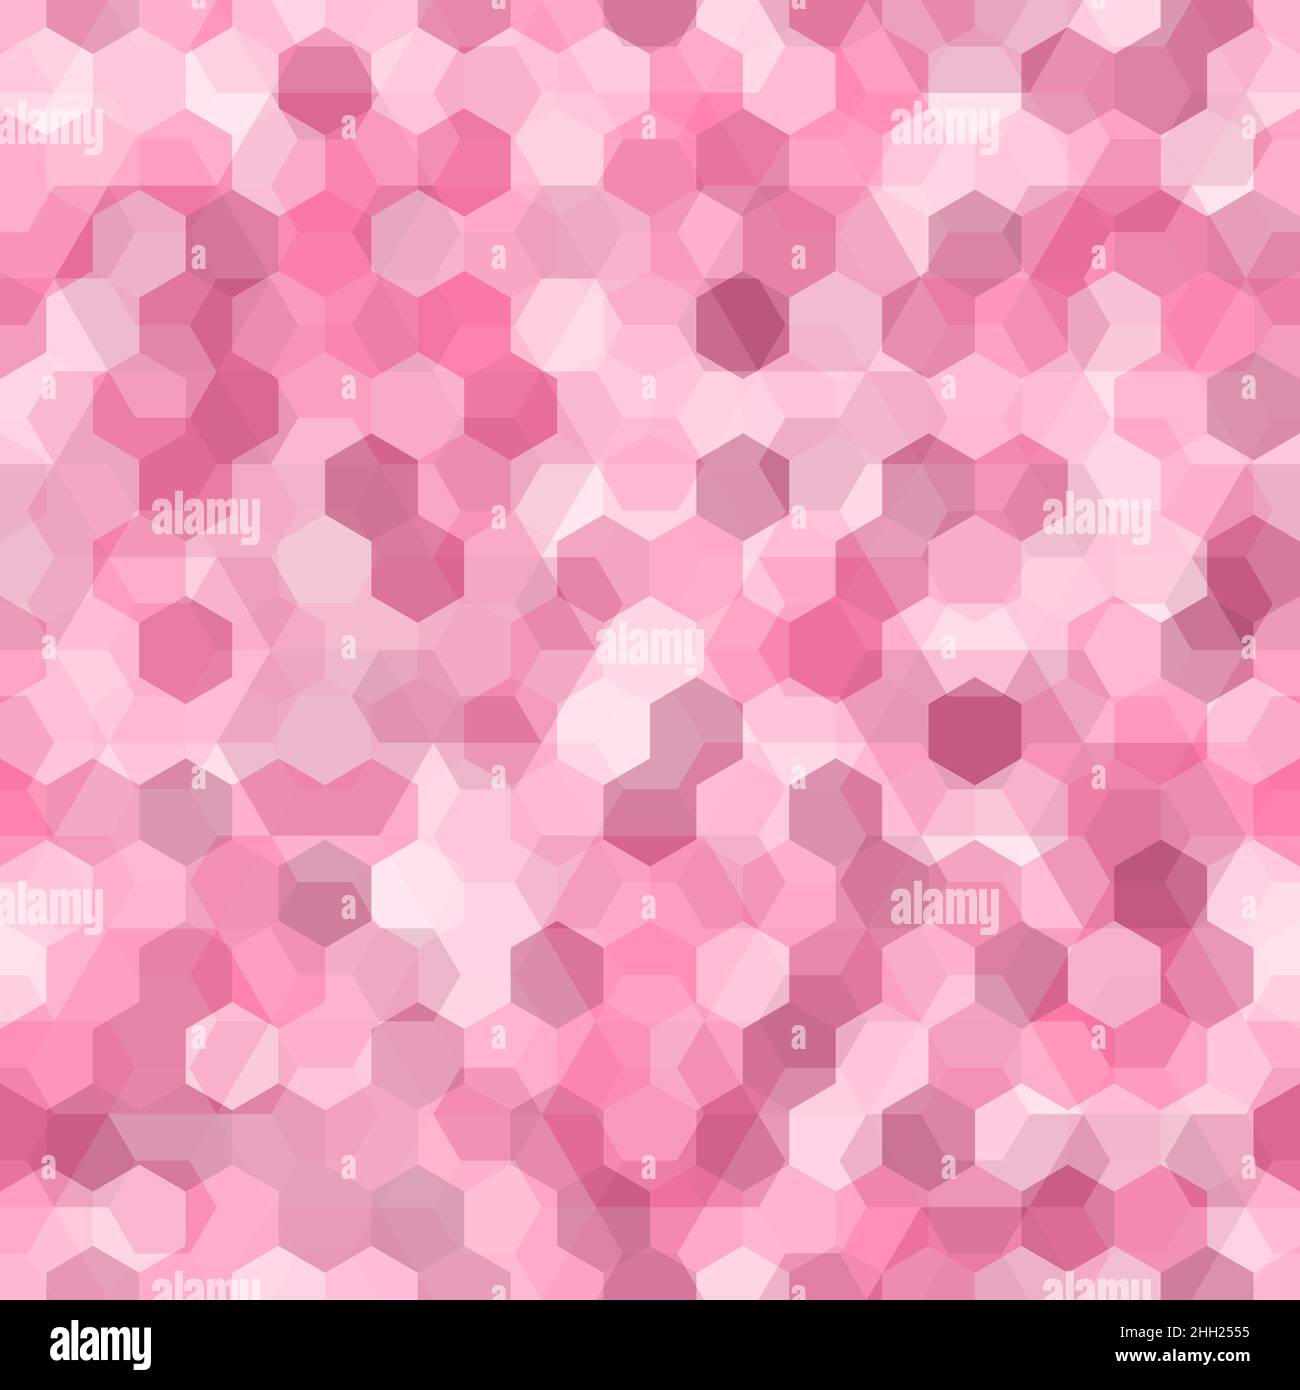 Camouflage seamless pattern with pink hexagonal endless geometric camo Stock Vector